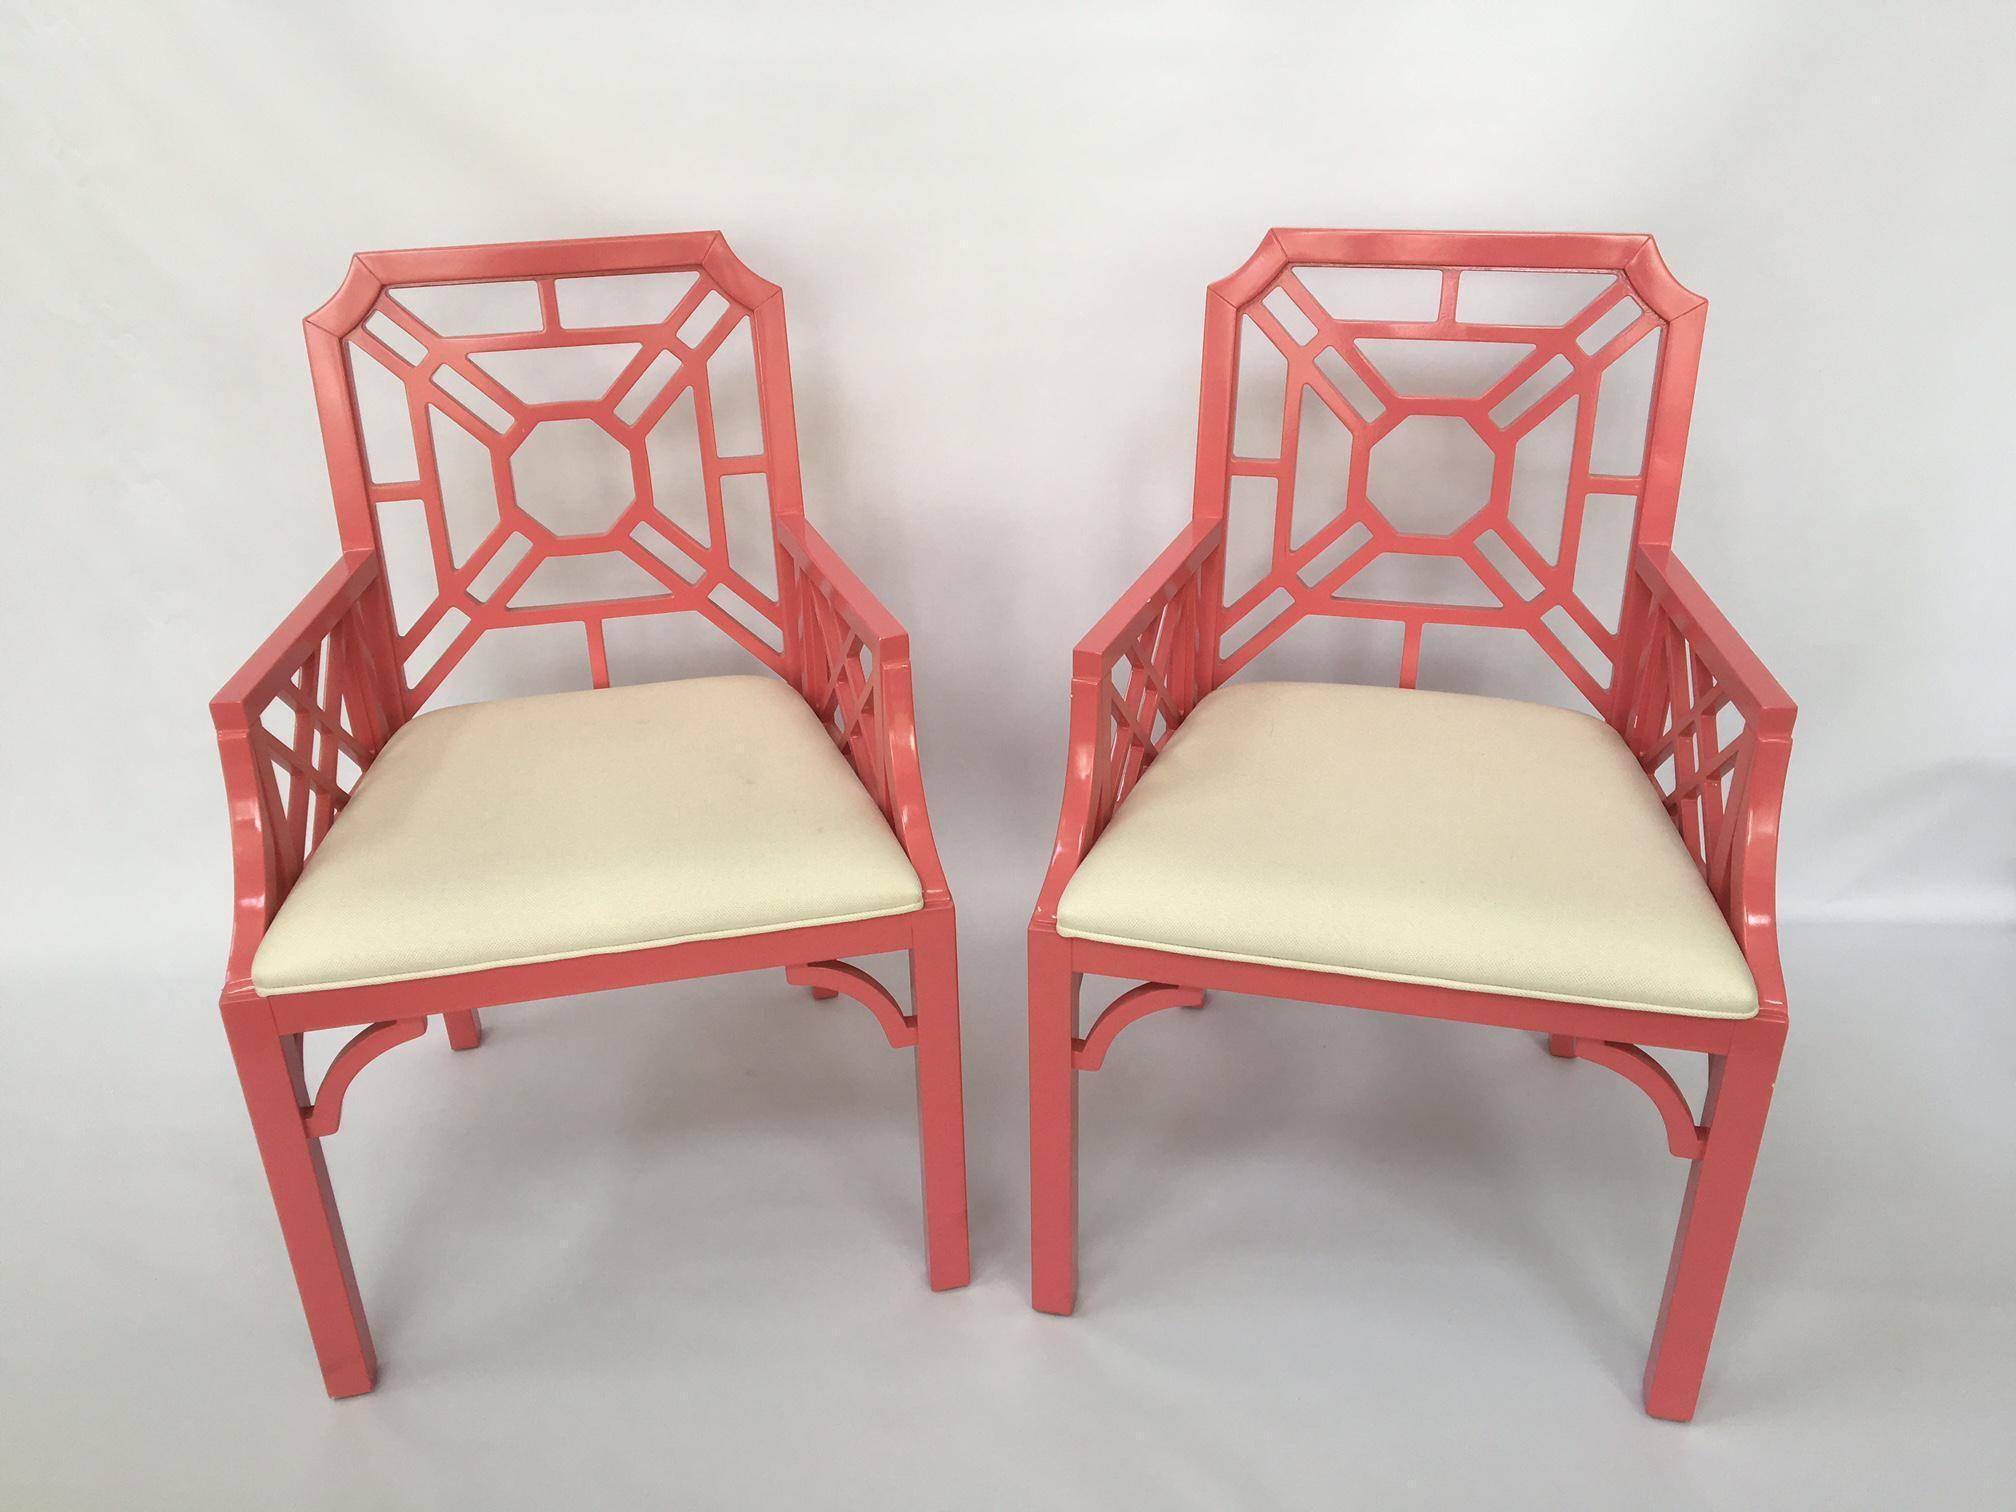 Chinoiserie style Chippendale chairs by Lilly Pulitzer Home in vibrant pink lacquer finish with solid crème upholstery. Excellent as-found condition, some tiny imperfections to finish.